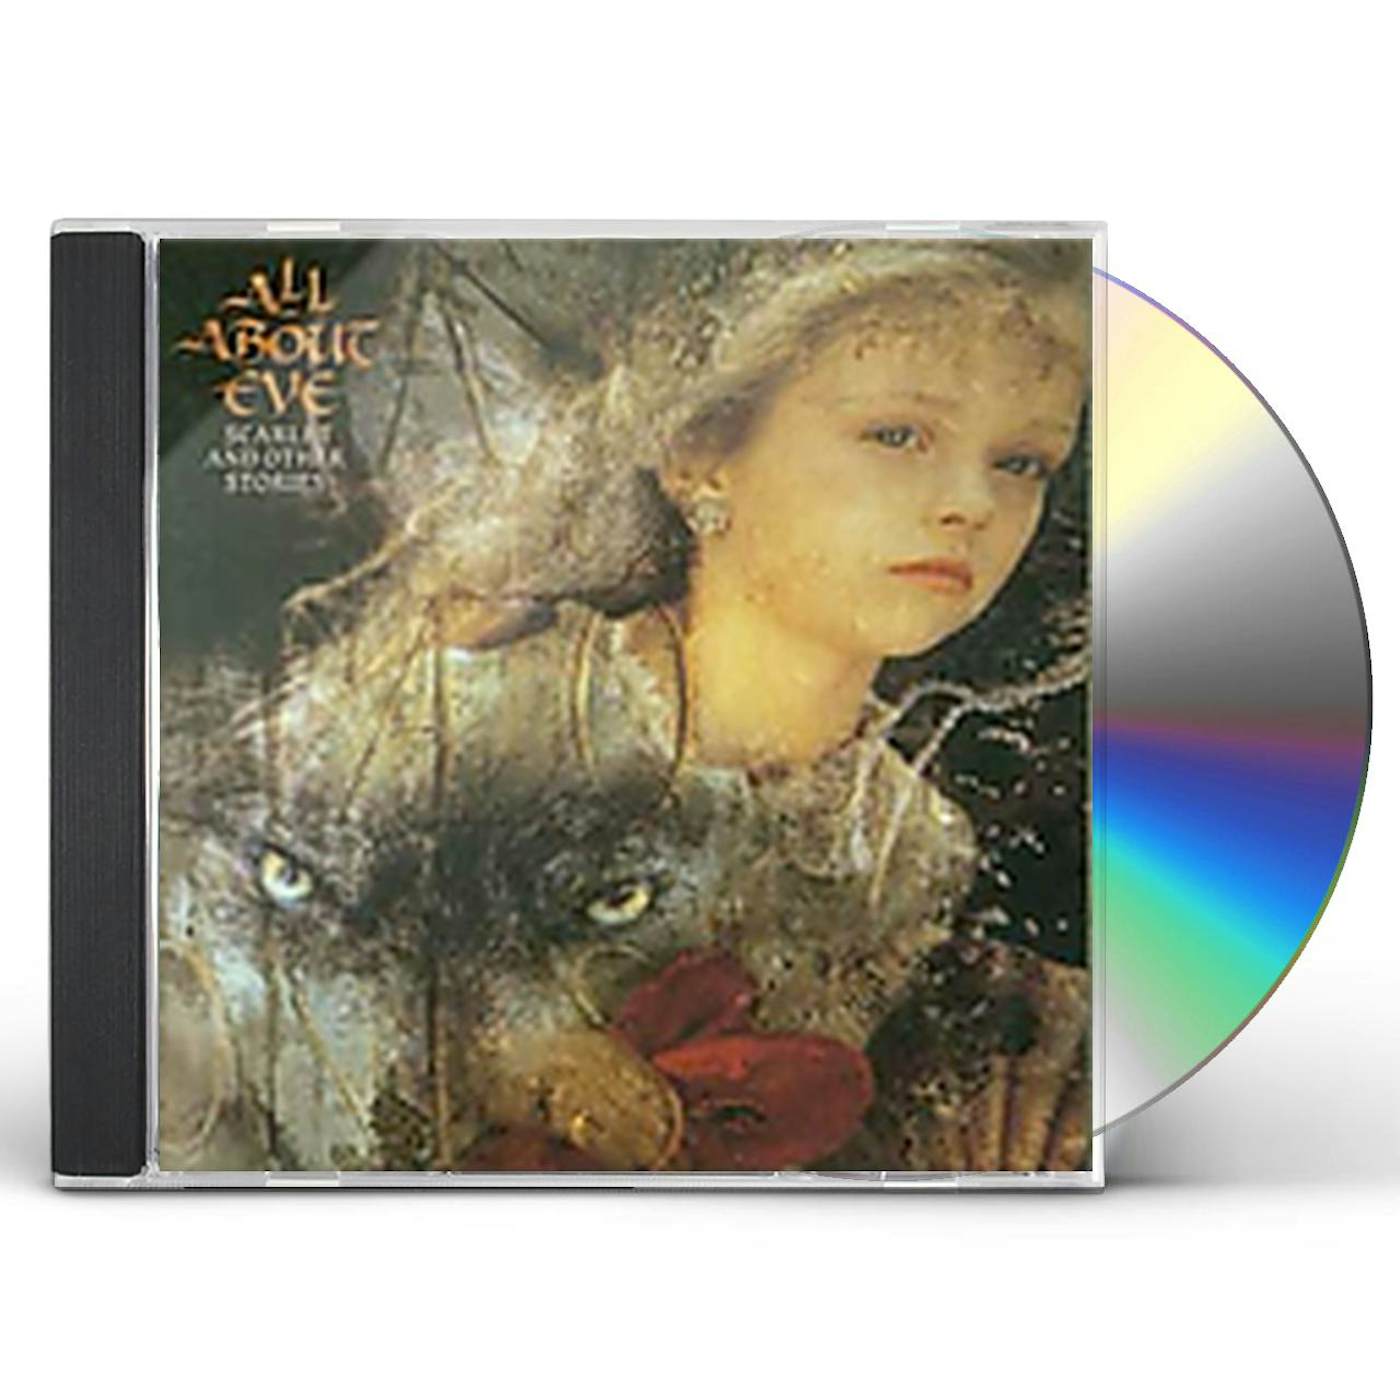 All About Eve SCARLET & OTHER STORIES CD